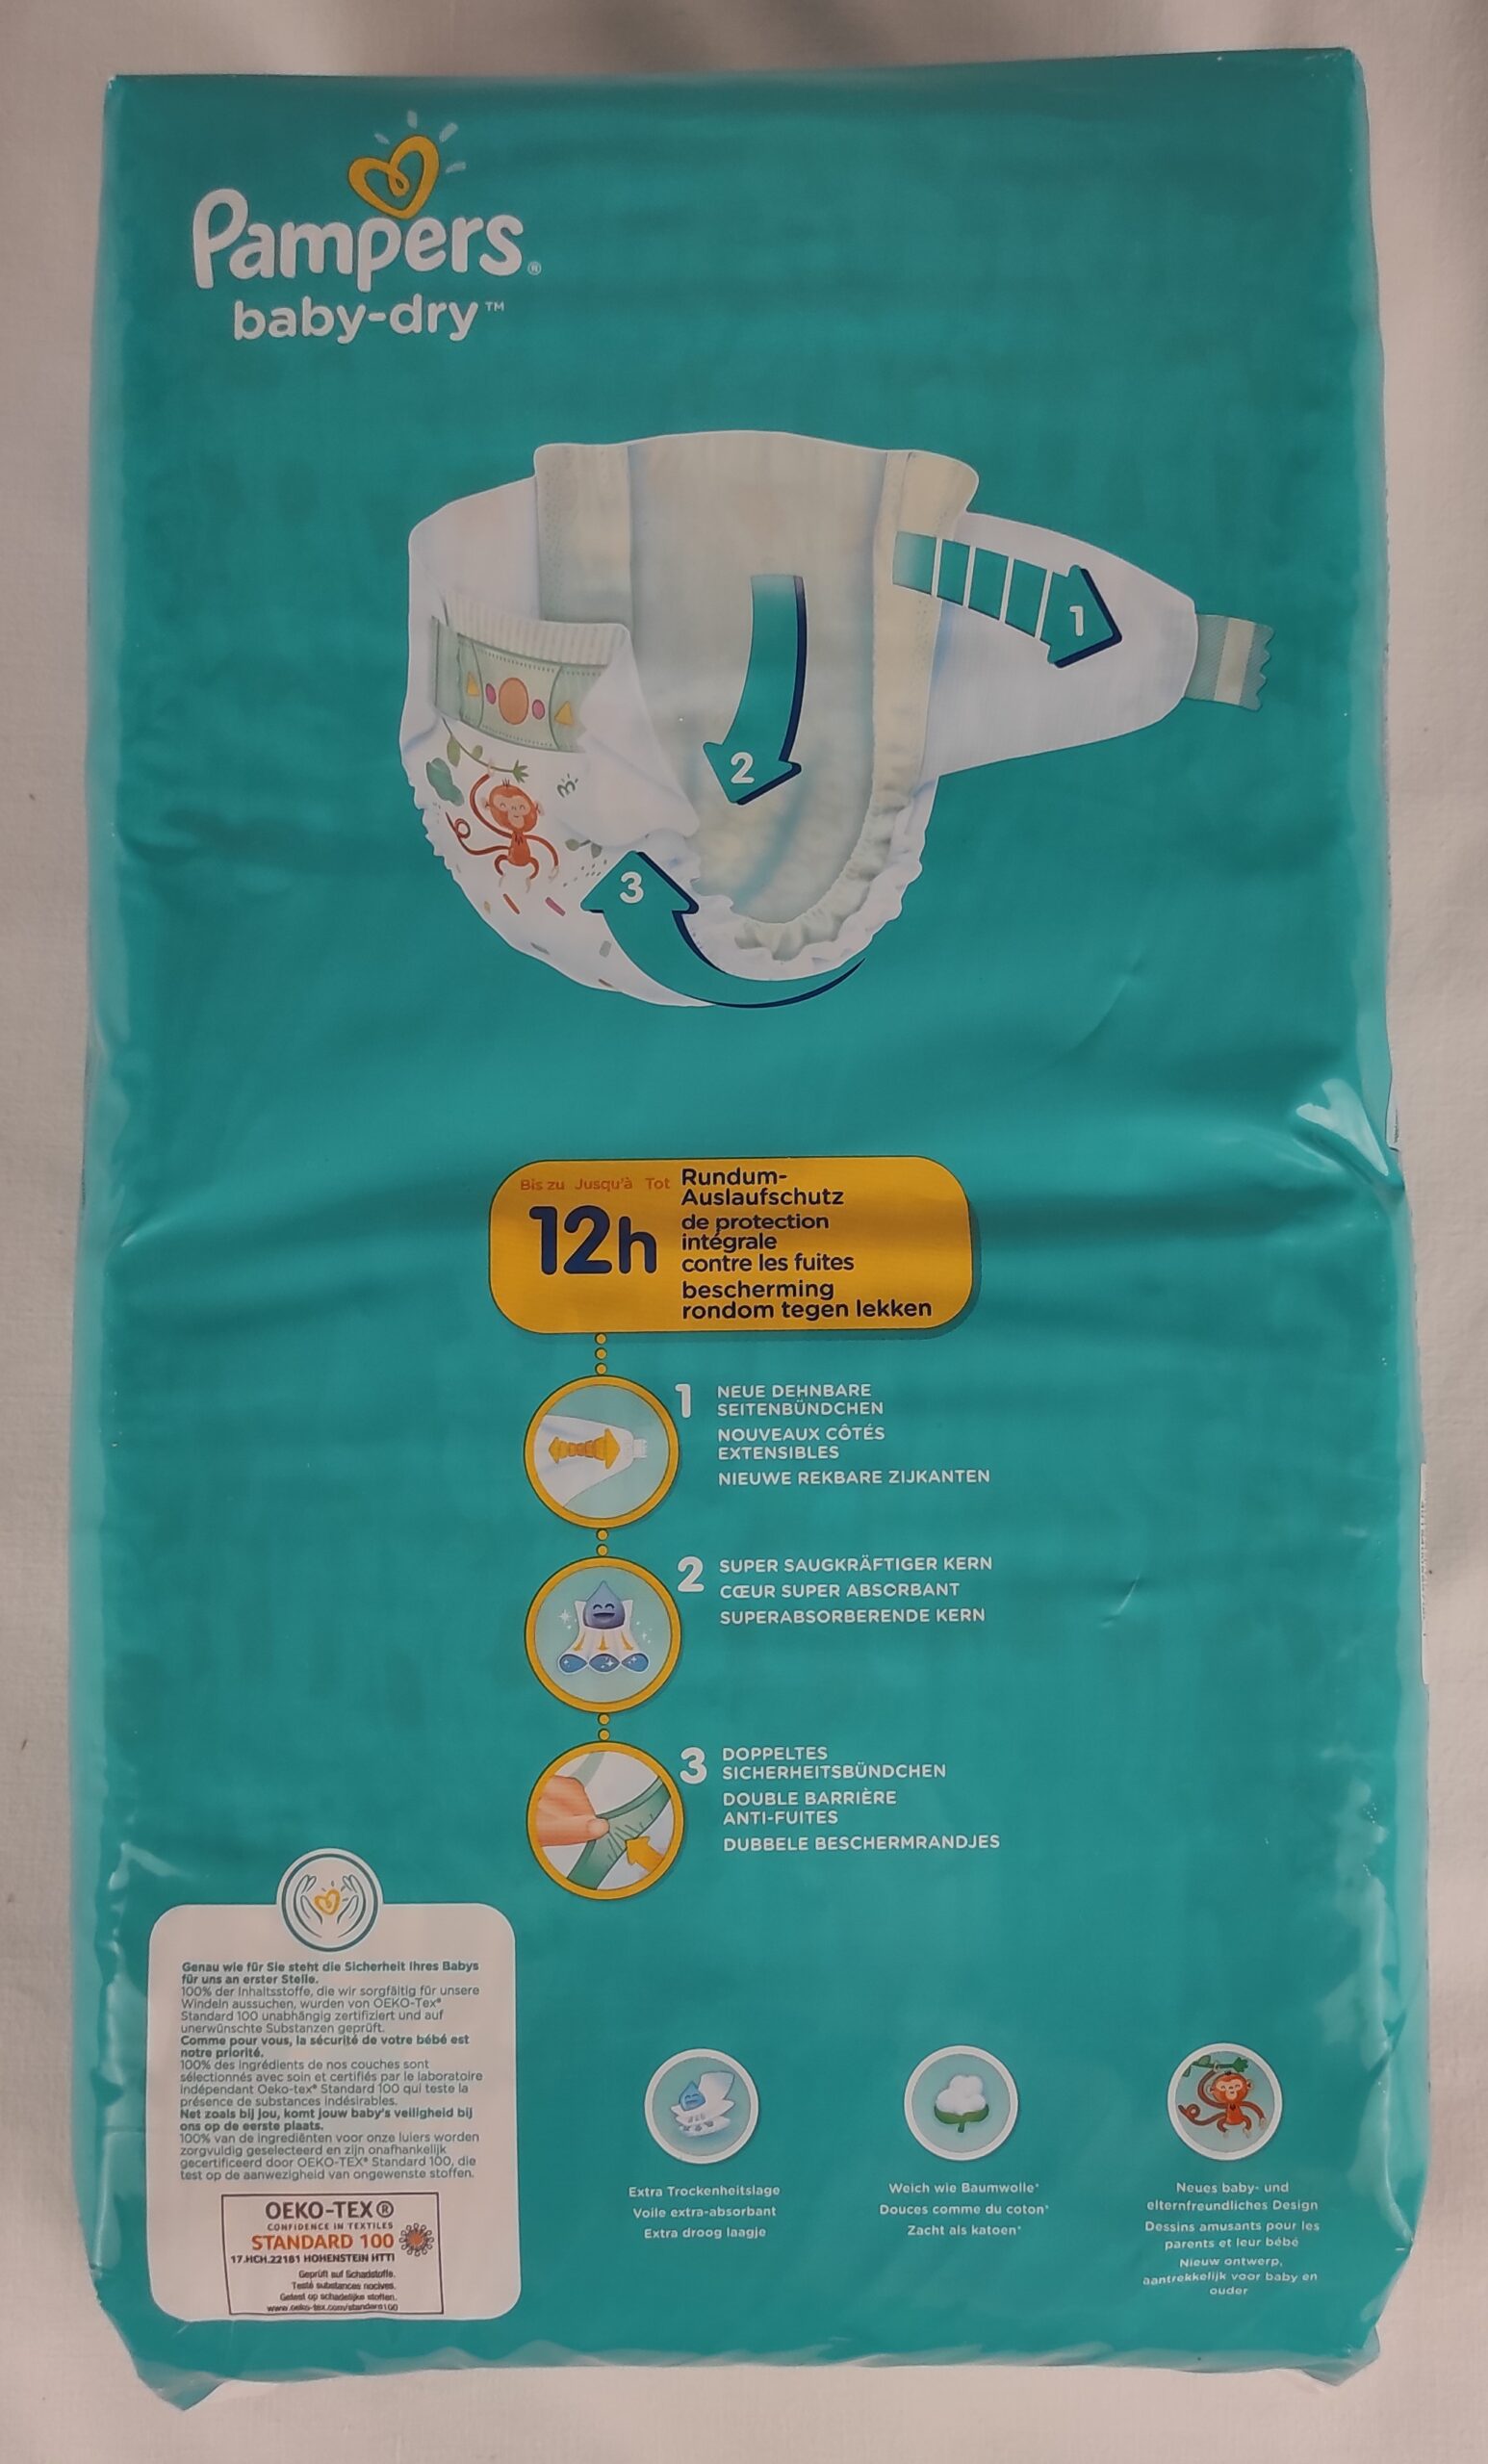 Pampers Diapers/Stuffers baby-dry (58 per package) ABDL'sWish